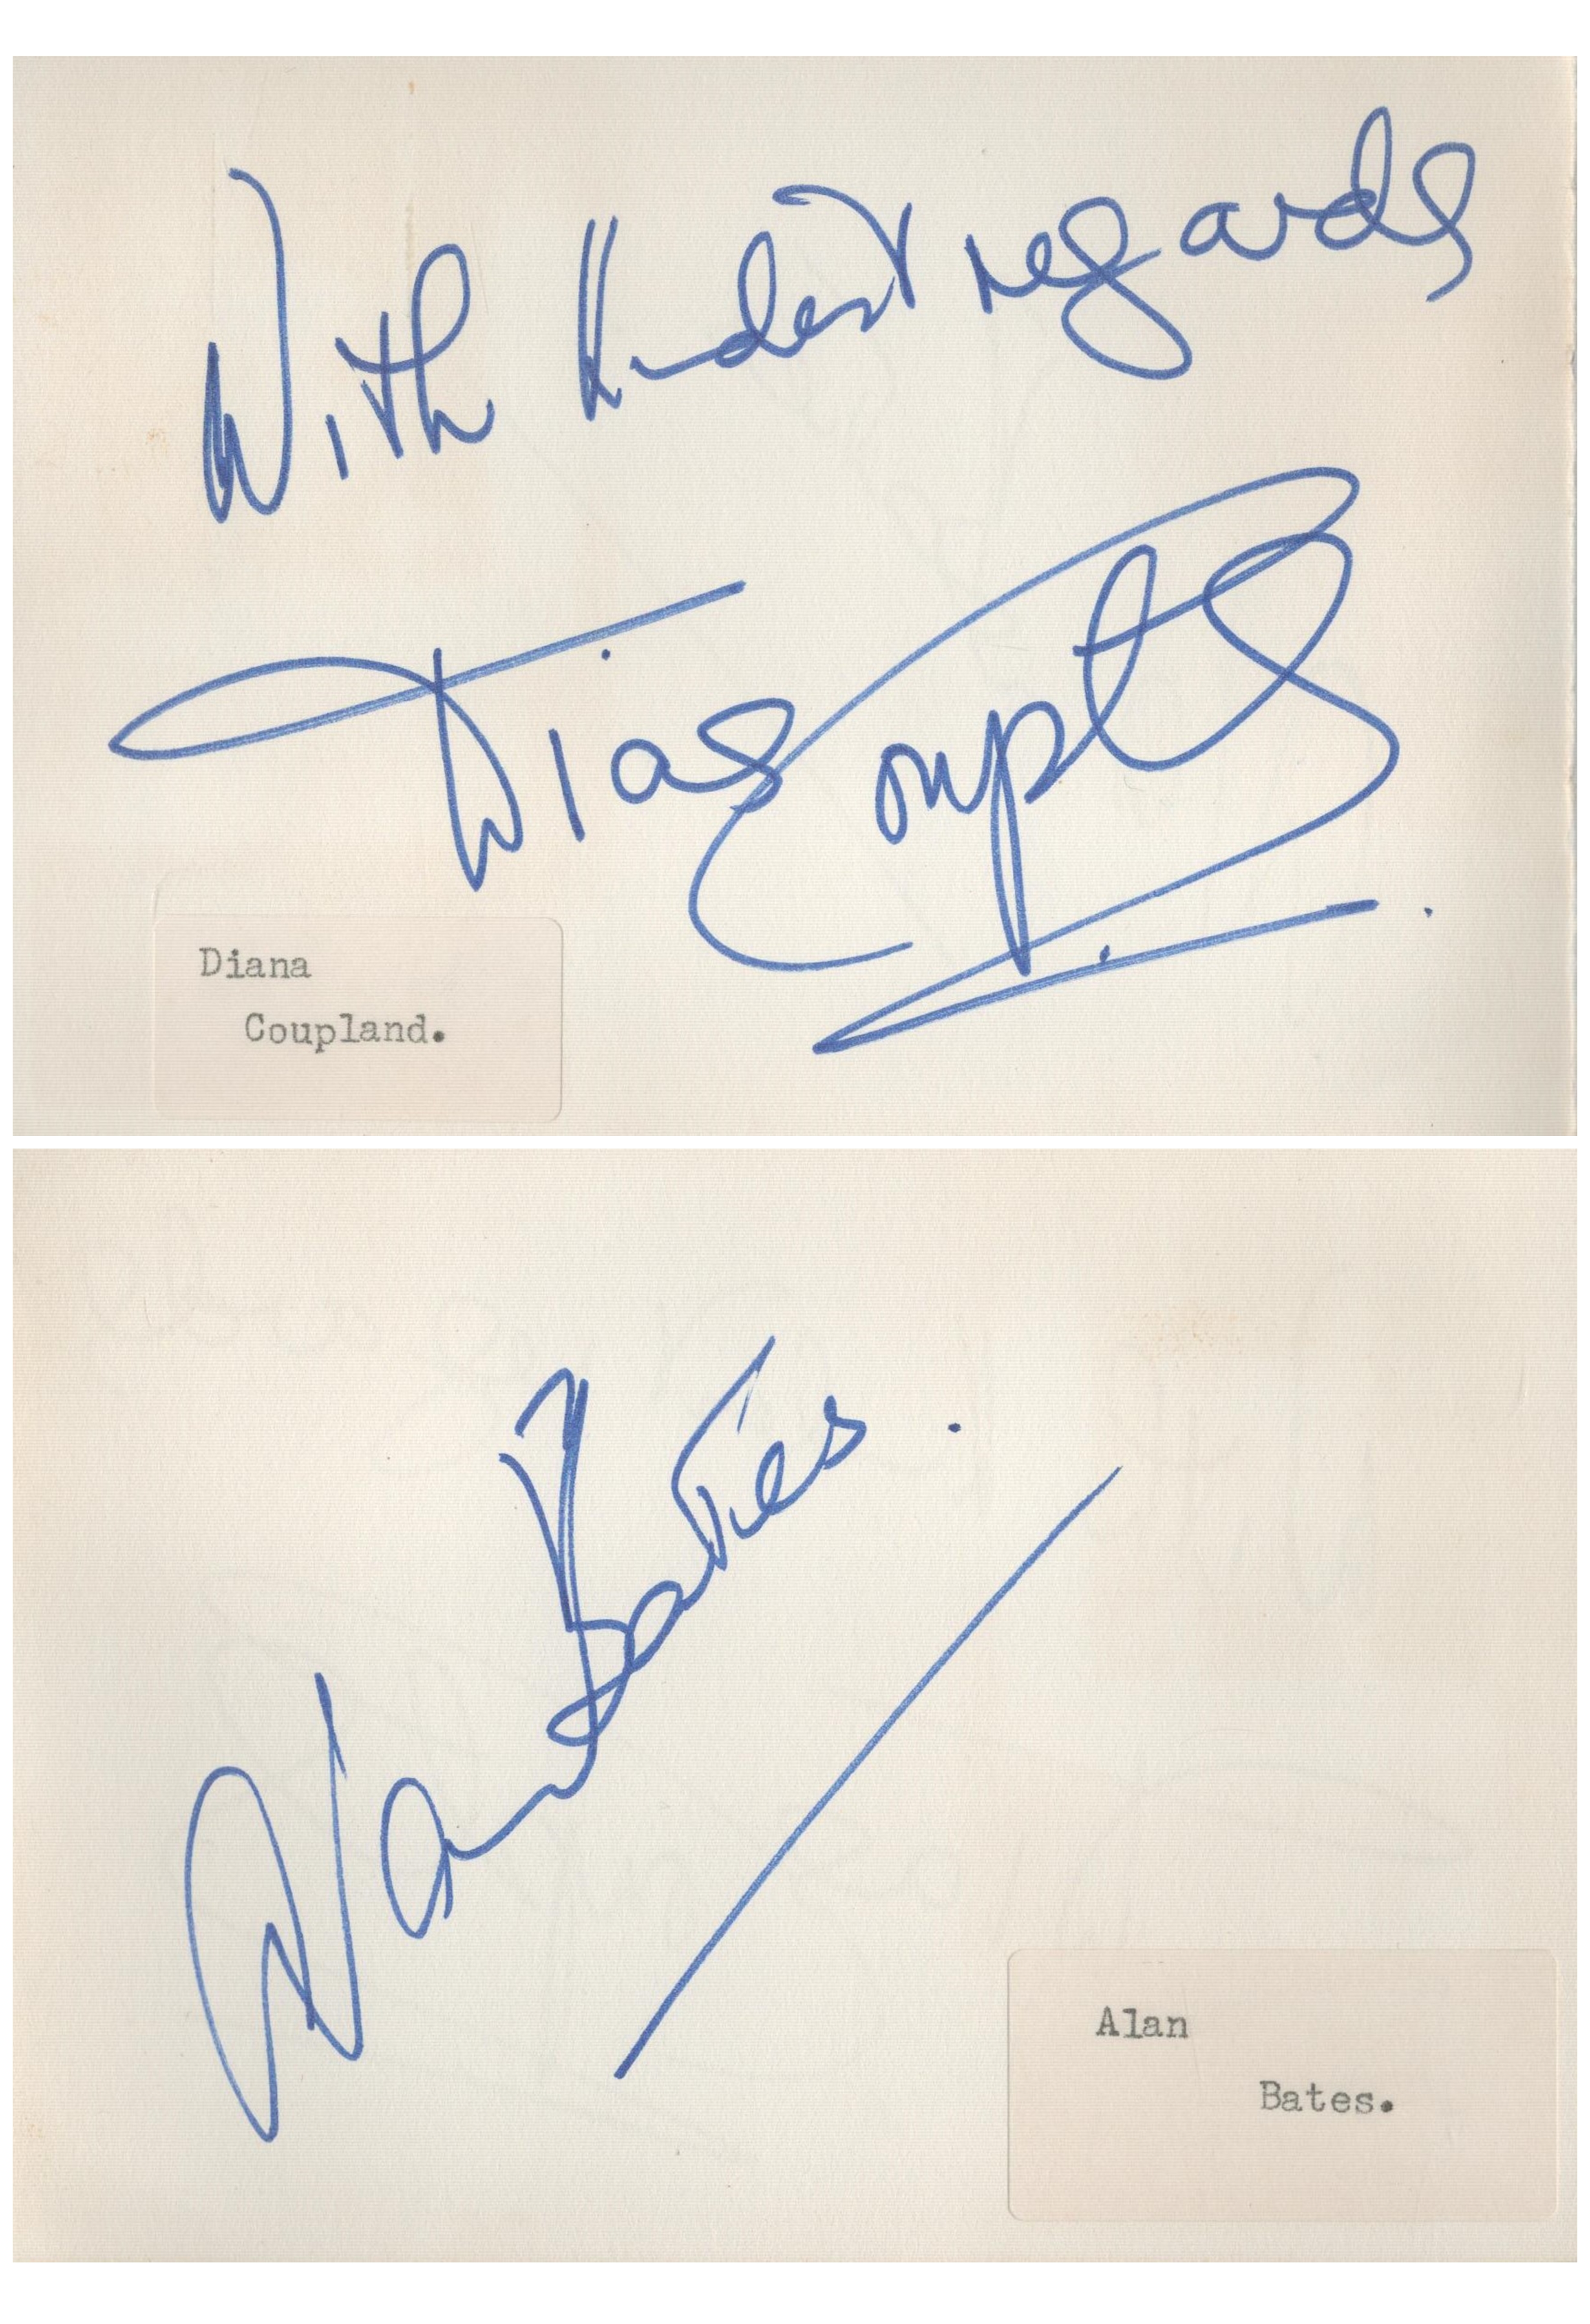 Alan Bates signed 6x4 inch album page with Diana Coupland on reverse side. Good Condition. All